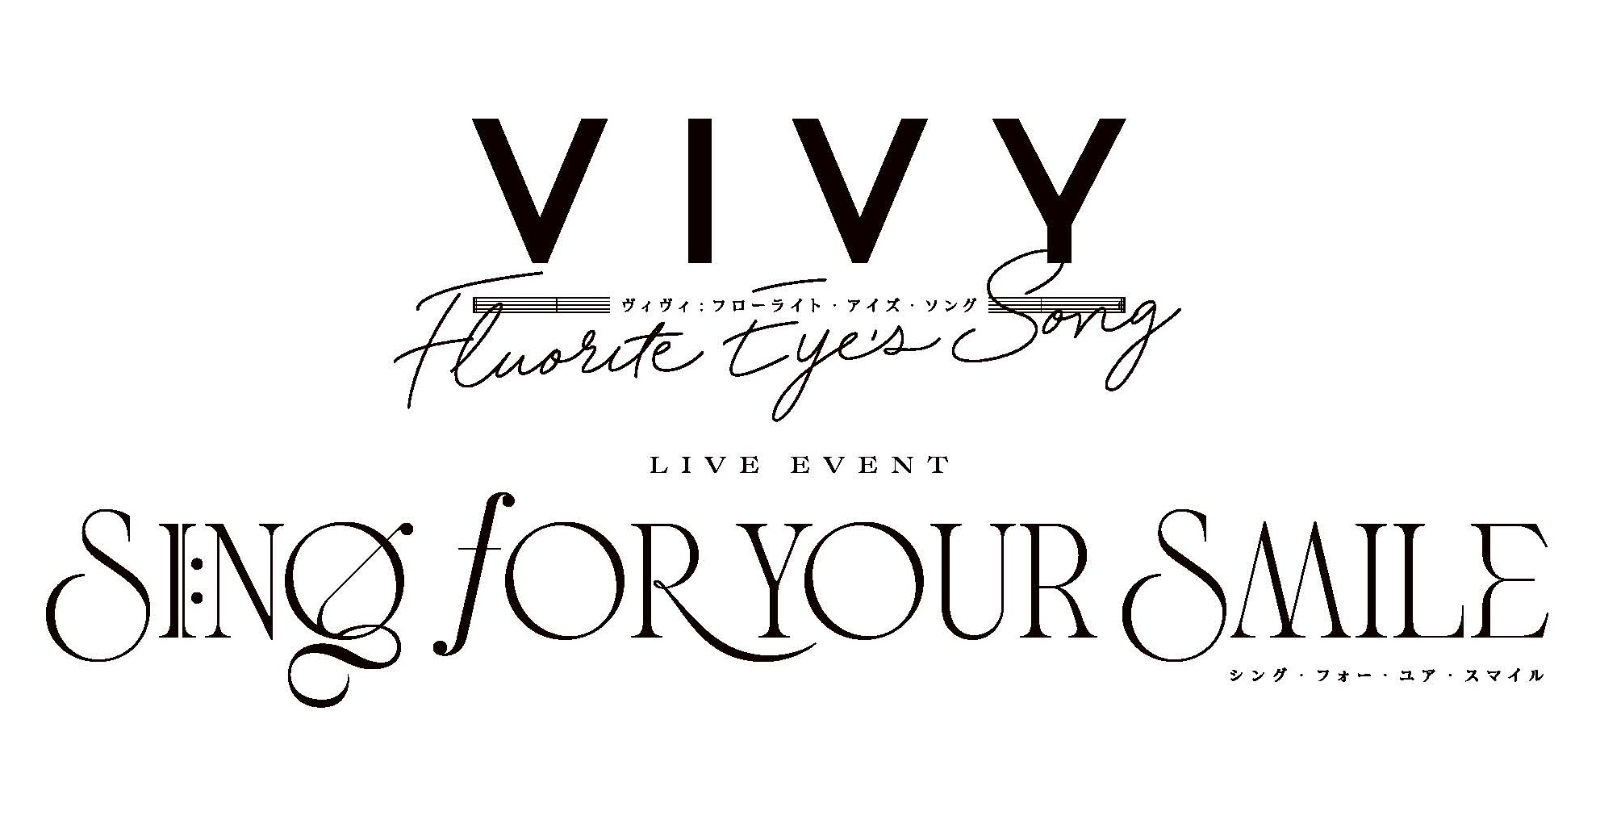 Vivy -Fluorite Eye's Song- Live Event 〜Sing for Your Smile〜【完全生産限定版】画像